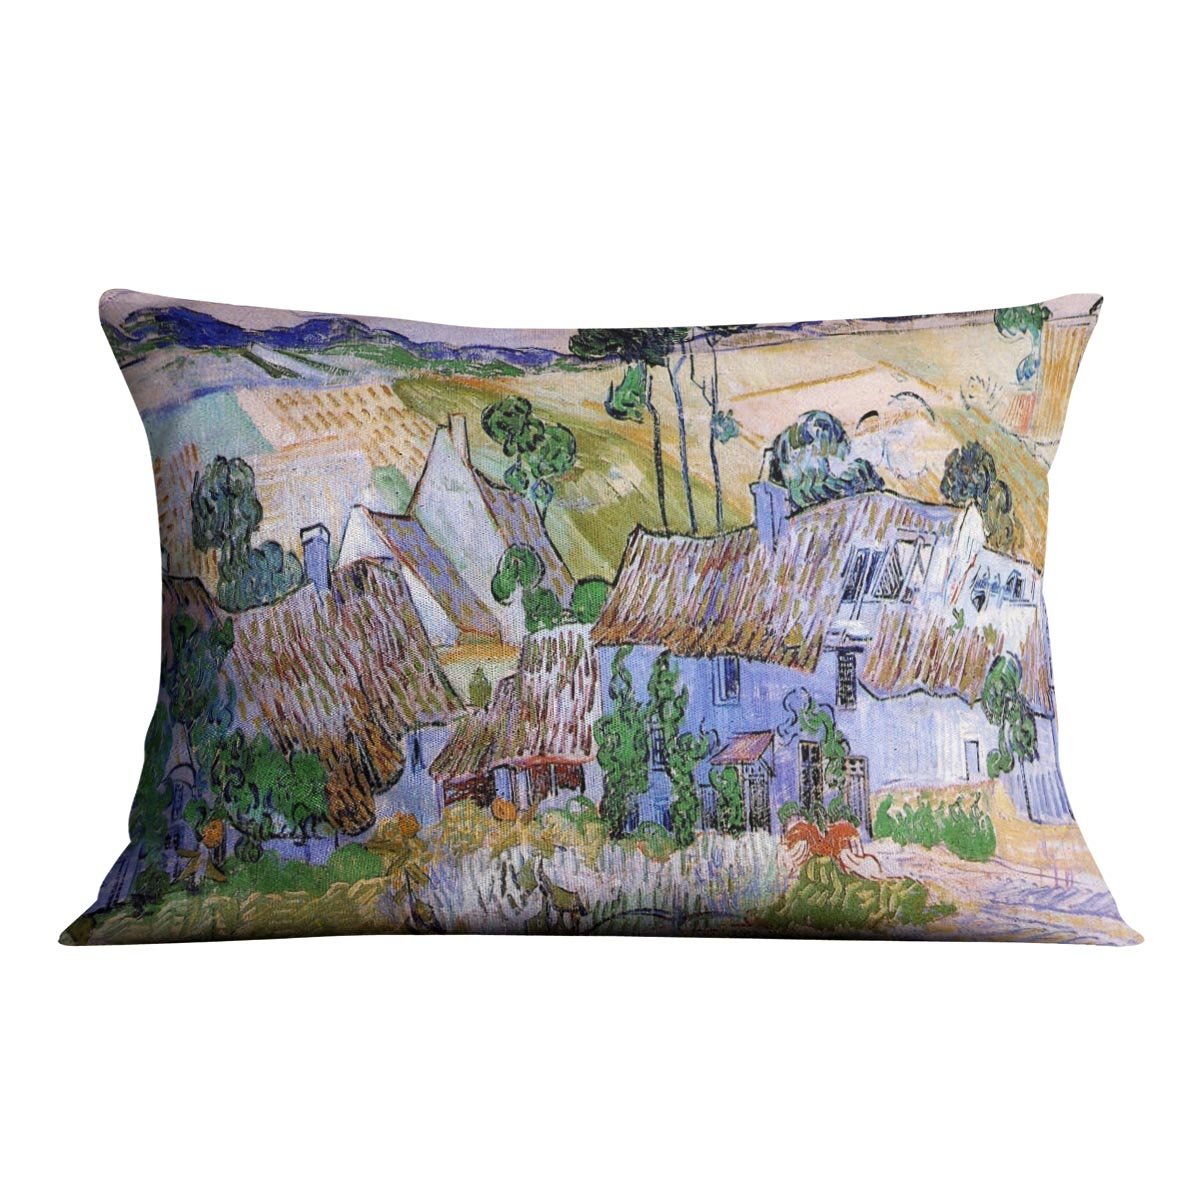 Thatched Cottages by a Hill by Van Gogh Throw Pillow